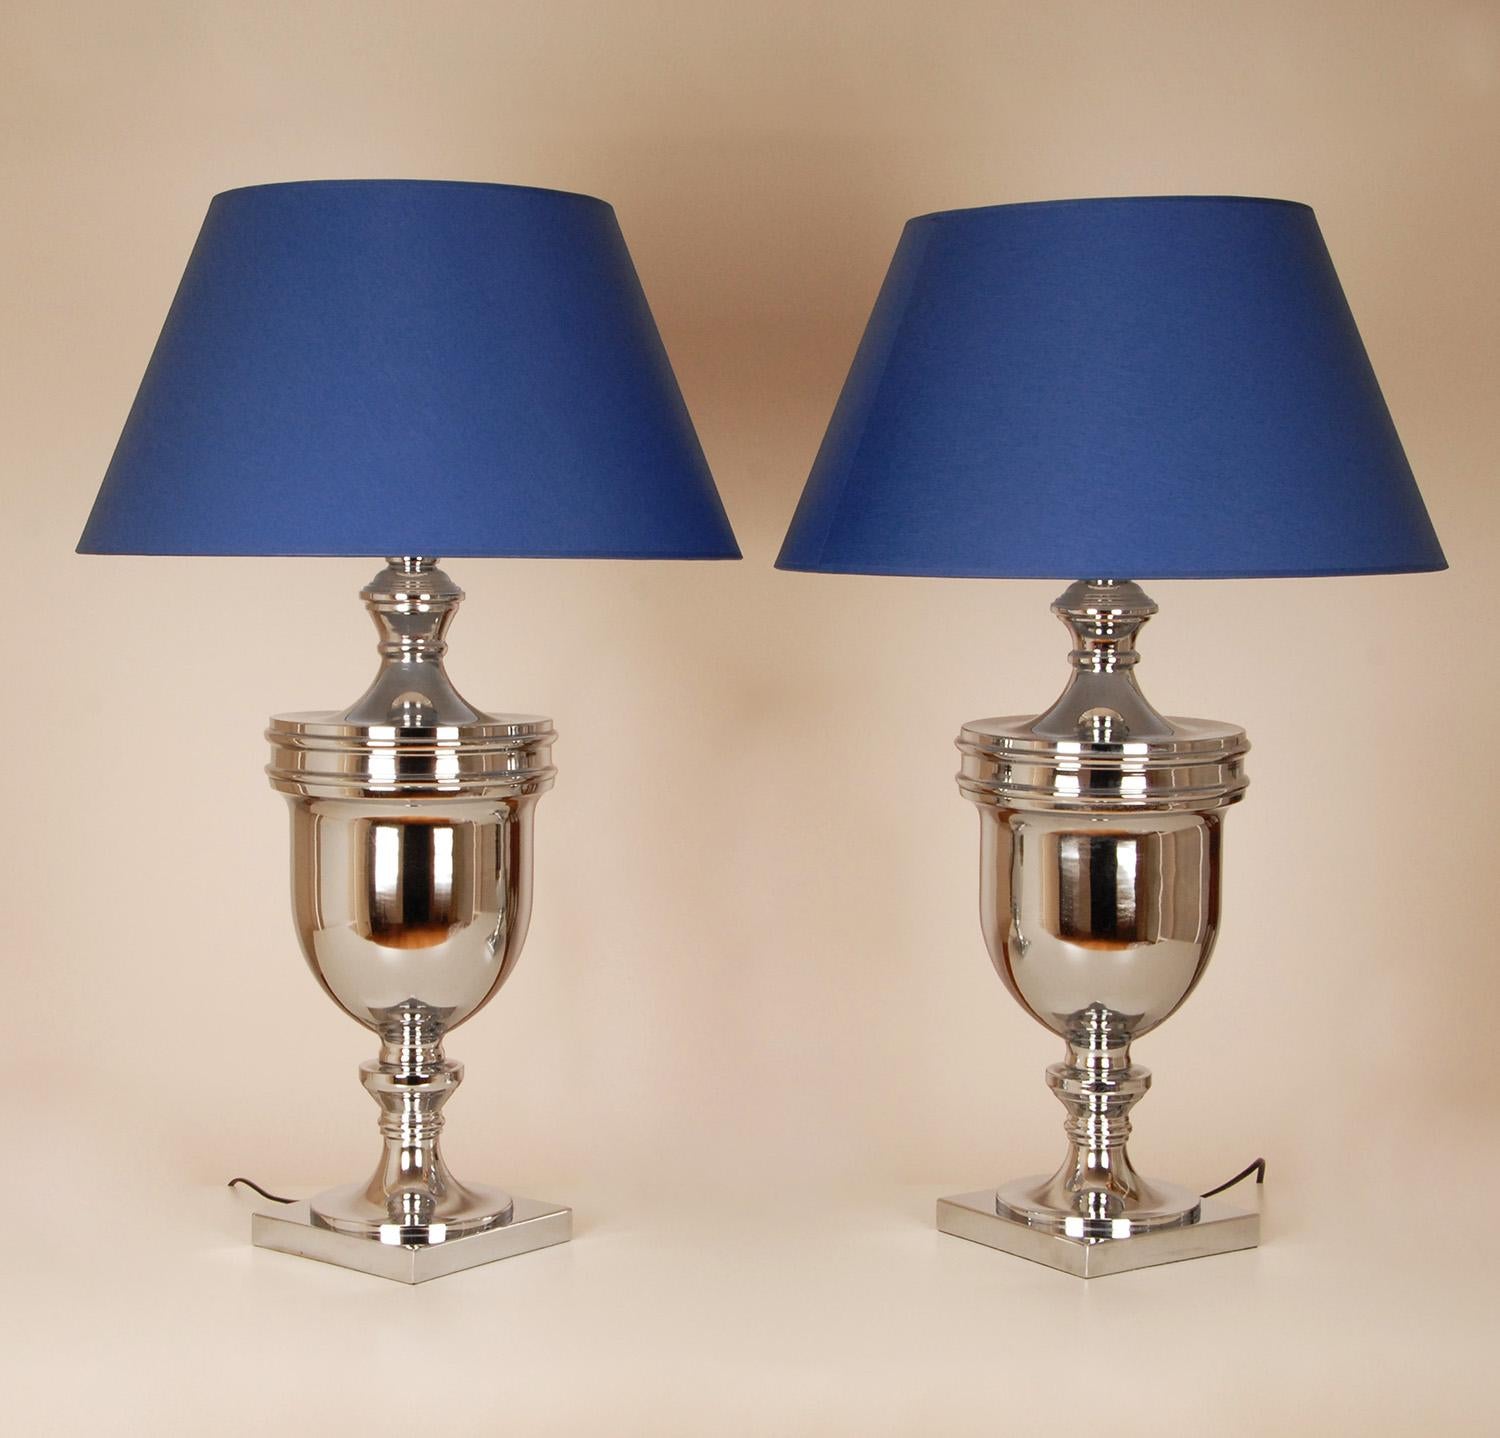 French Table Lamps Chrome Silver Royal Blue Modern Tall High End Table Lamps a pair